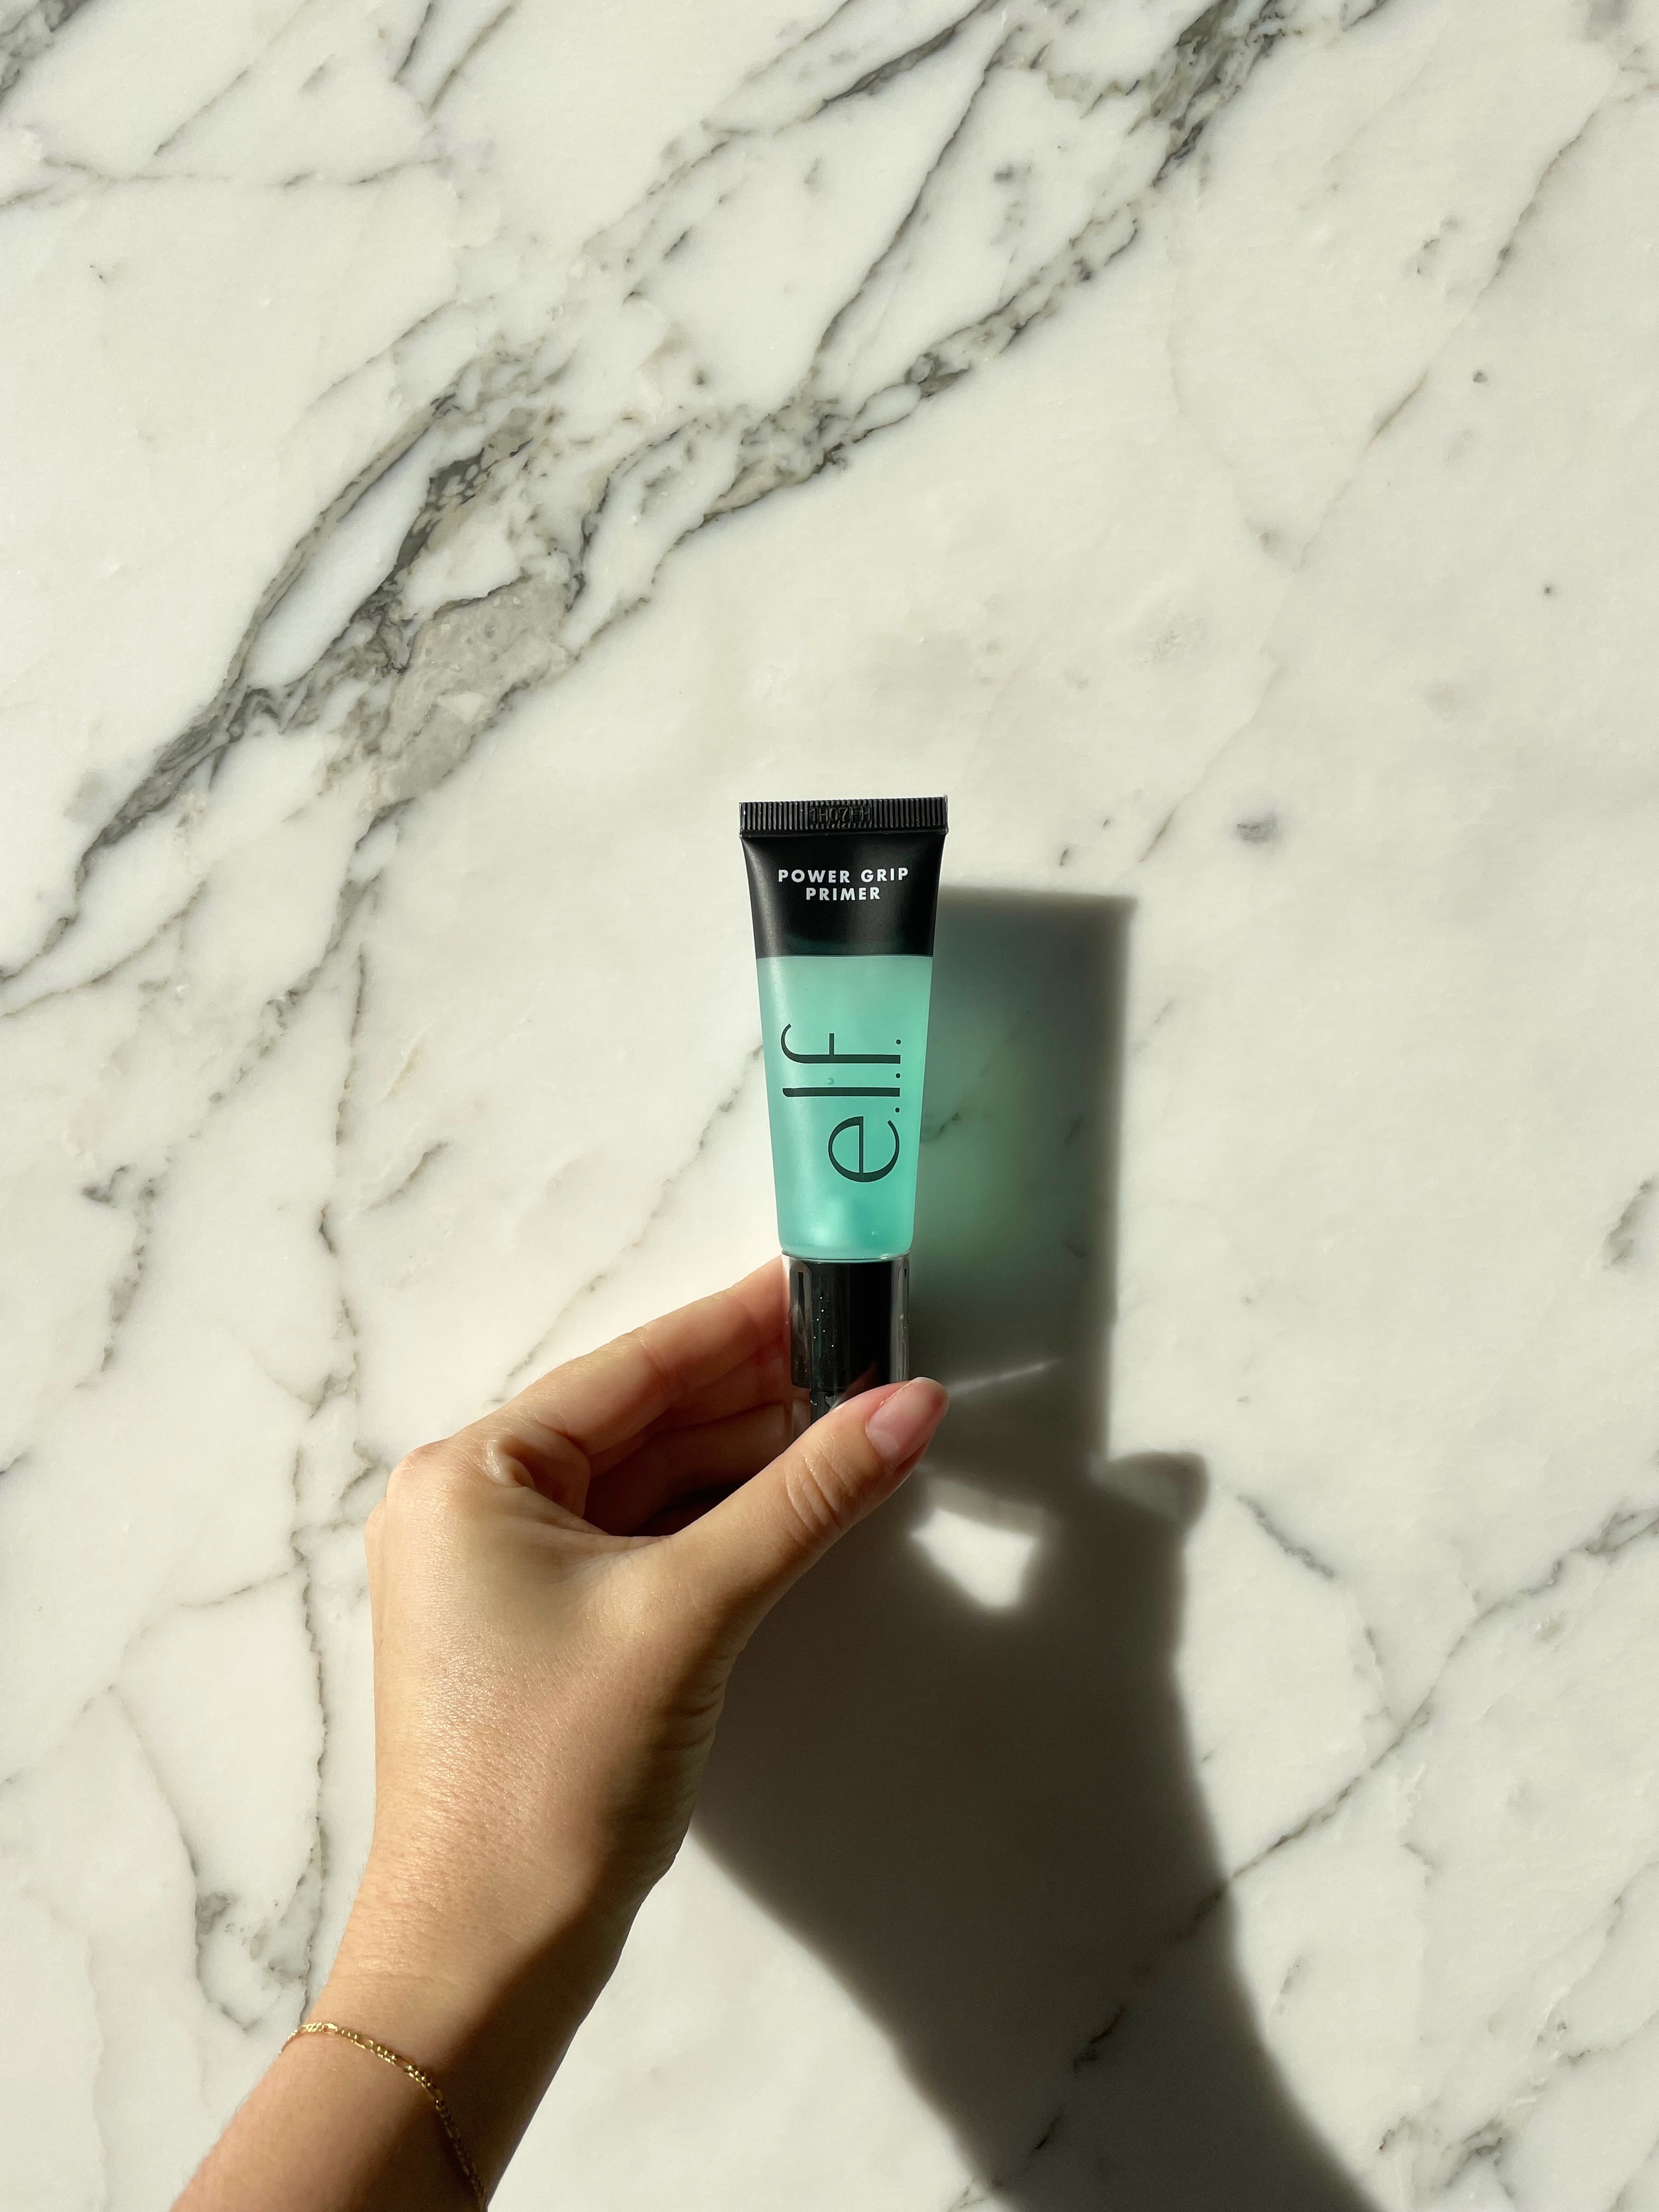 E.l.f. Cosmetics' Power Grip Primer Keeps My Makeup Fresh and My Skin  Hydrated